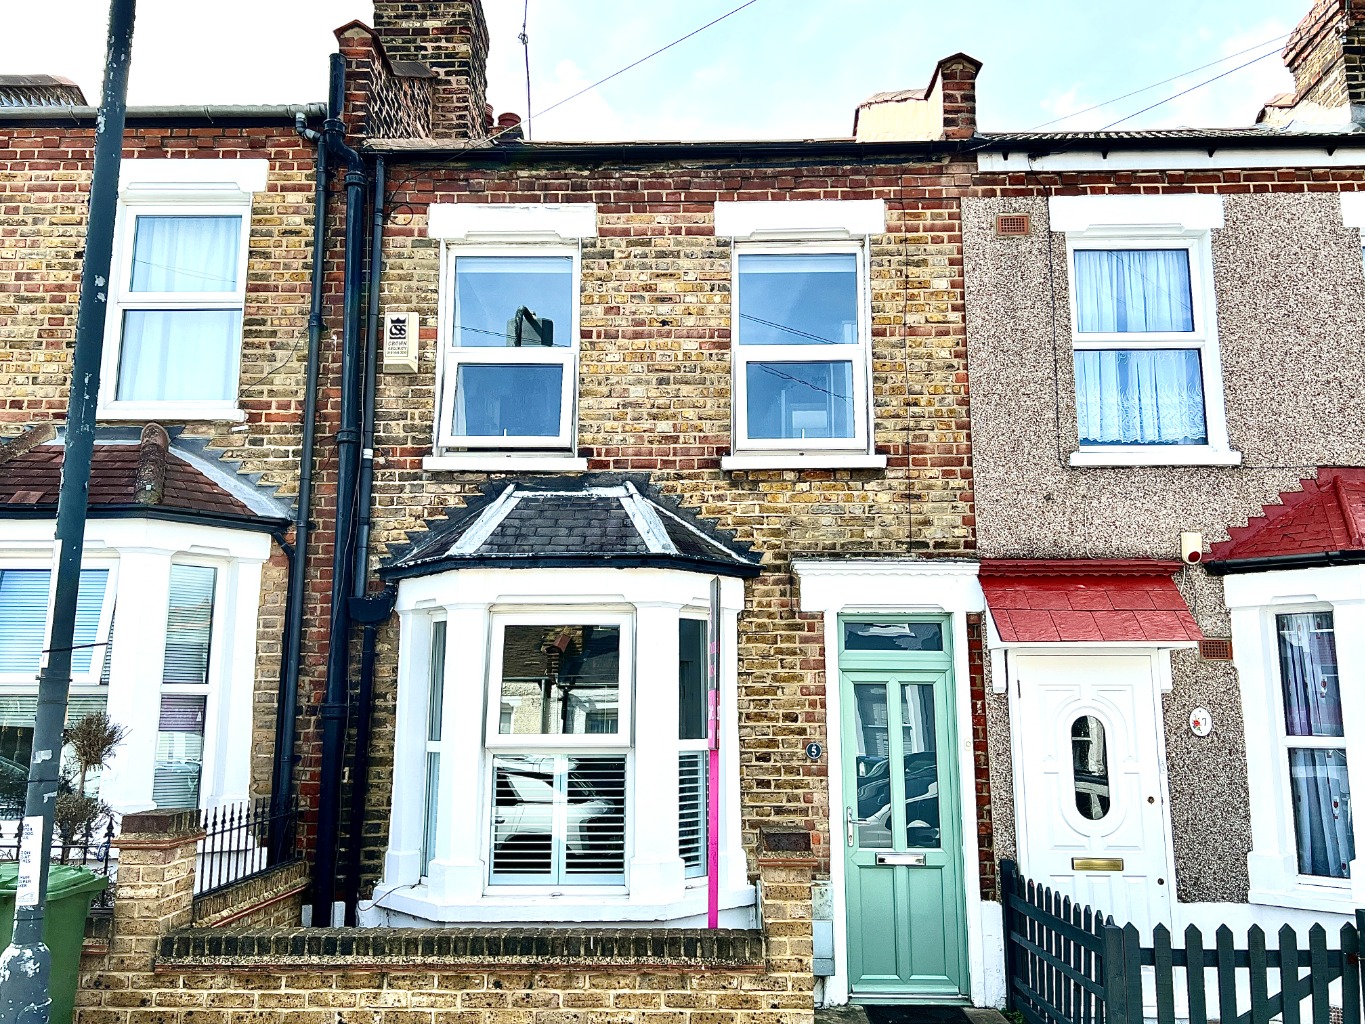 Beaumont Gibbs are delighted to offer this well presented, brick and bay fronted two double bedroomed Victorian terrace house for sale. This home is full of charm and character and is situated just off of Plumstead Common